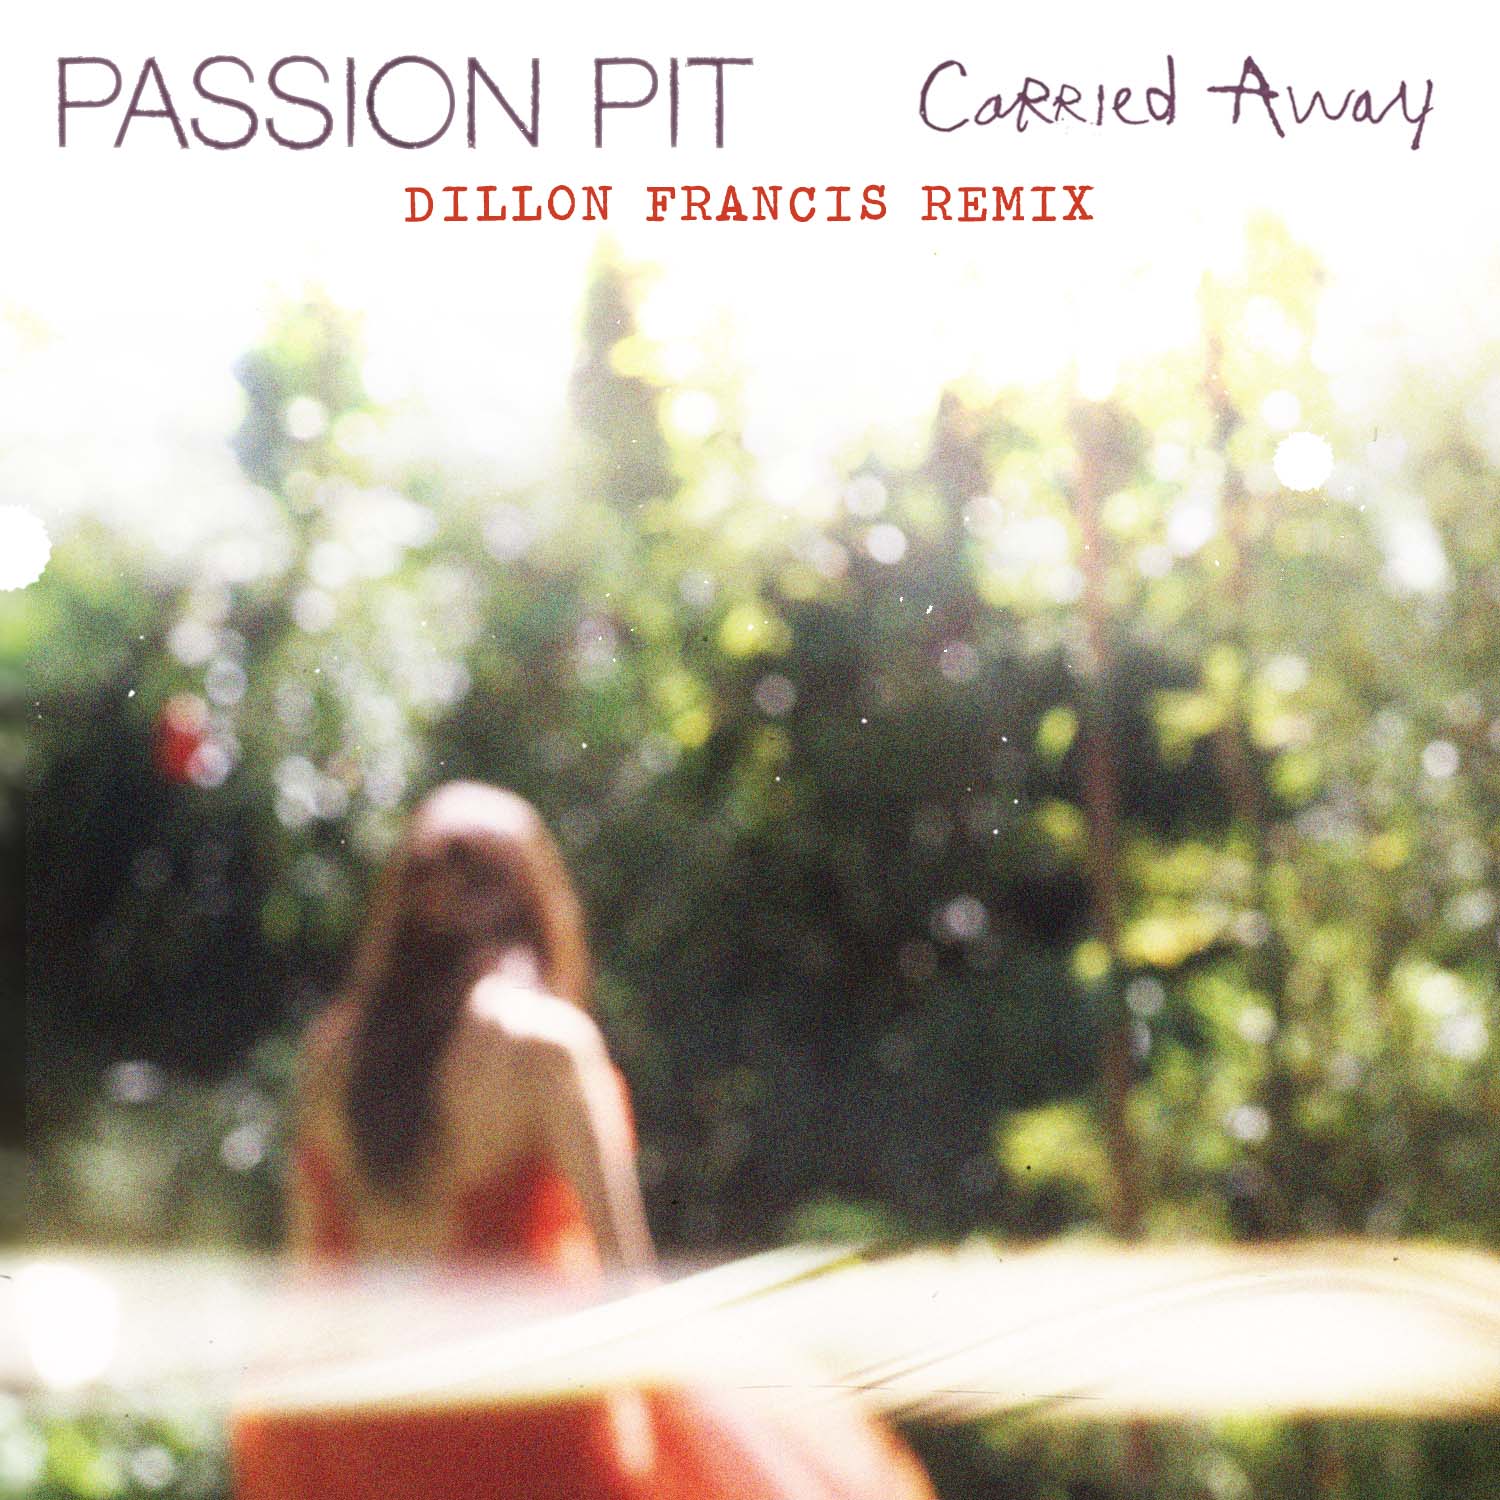 Passion Pit – Carried Away (Dillon Francis Remix) [Moombahton]